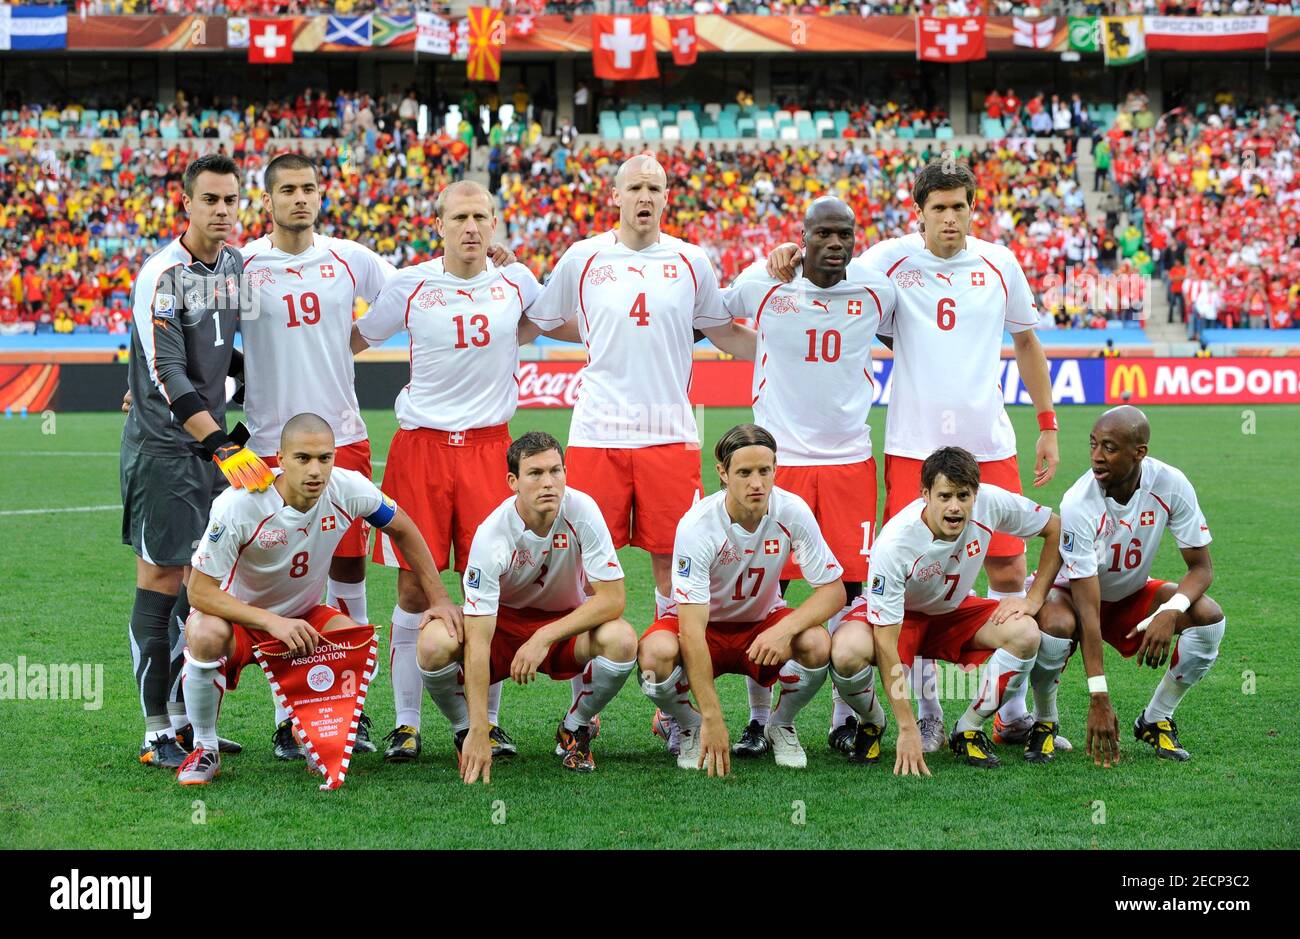 Football - Spain v Switzerland - FIFA World Cup South Africa 2010 - Group H  - Durban Stadium, Durban, South Africa - 16/6/10 Switzerland players pose  for team picture before kick off